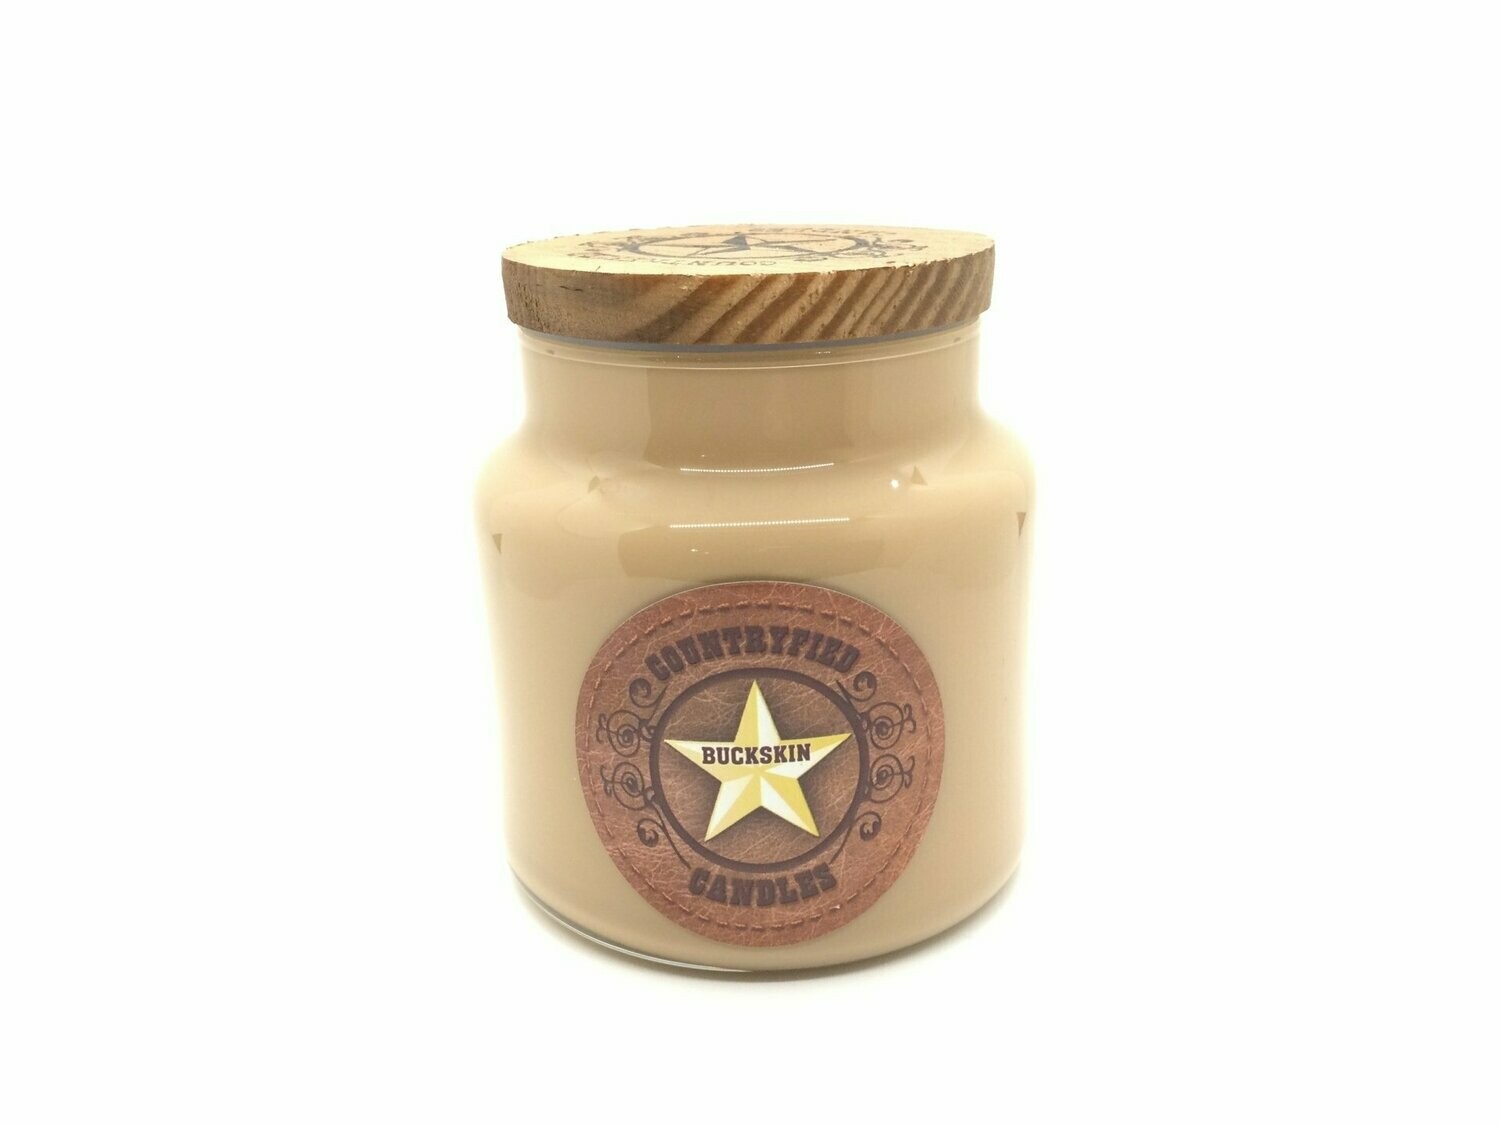 Buckskin Country Classic Candle 16 oz.